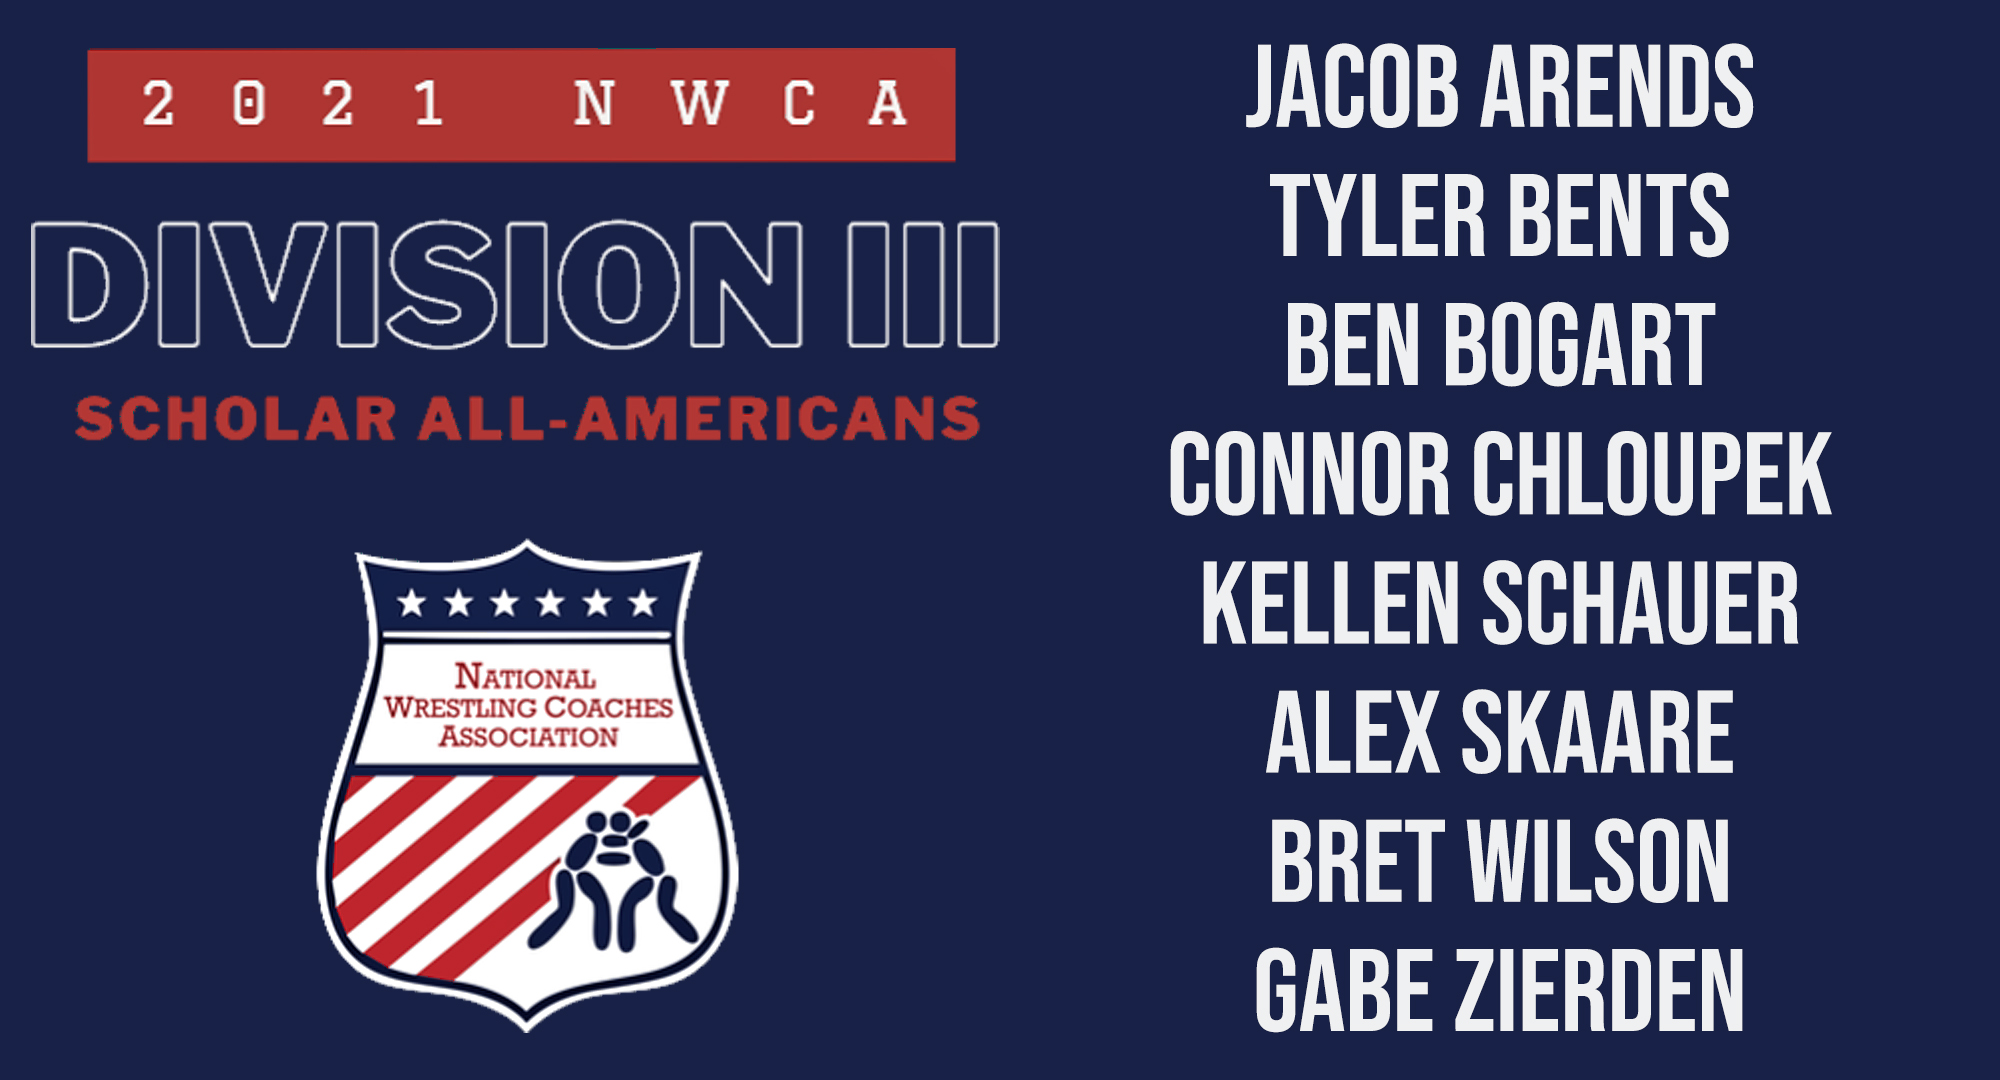 Concordia had eight individuals earn NWCA Scholar All-American honors. Jacob Arends, Tyler Bents, Benjamin Bogart, Connor Chloupek, Kellen Schauer, Alex Skaare, Bret Wilson and Gabe Zierden all received the academic honor handed out by the NWCA.